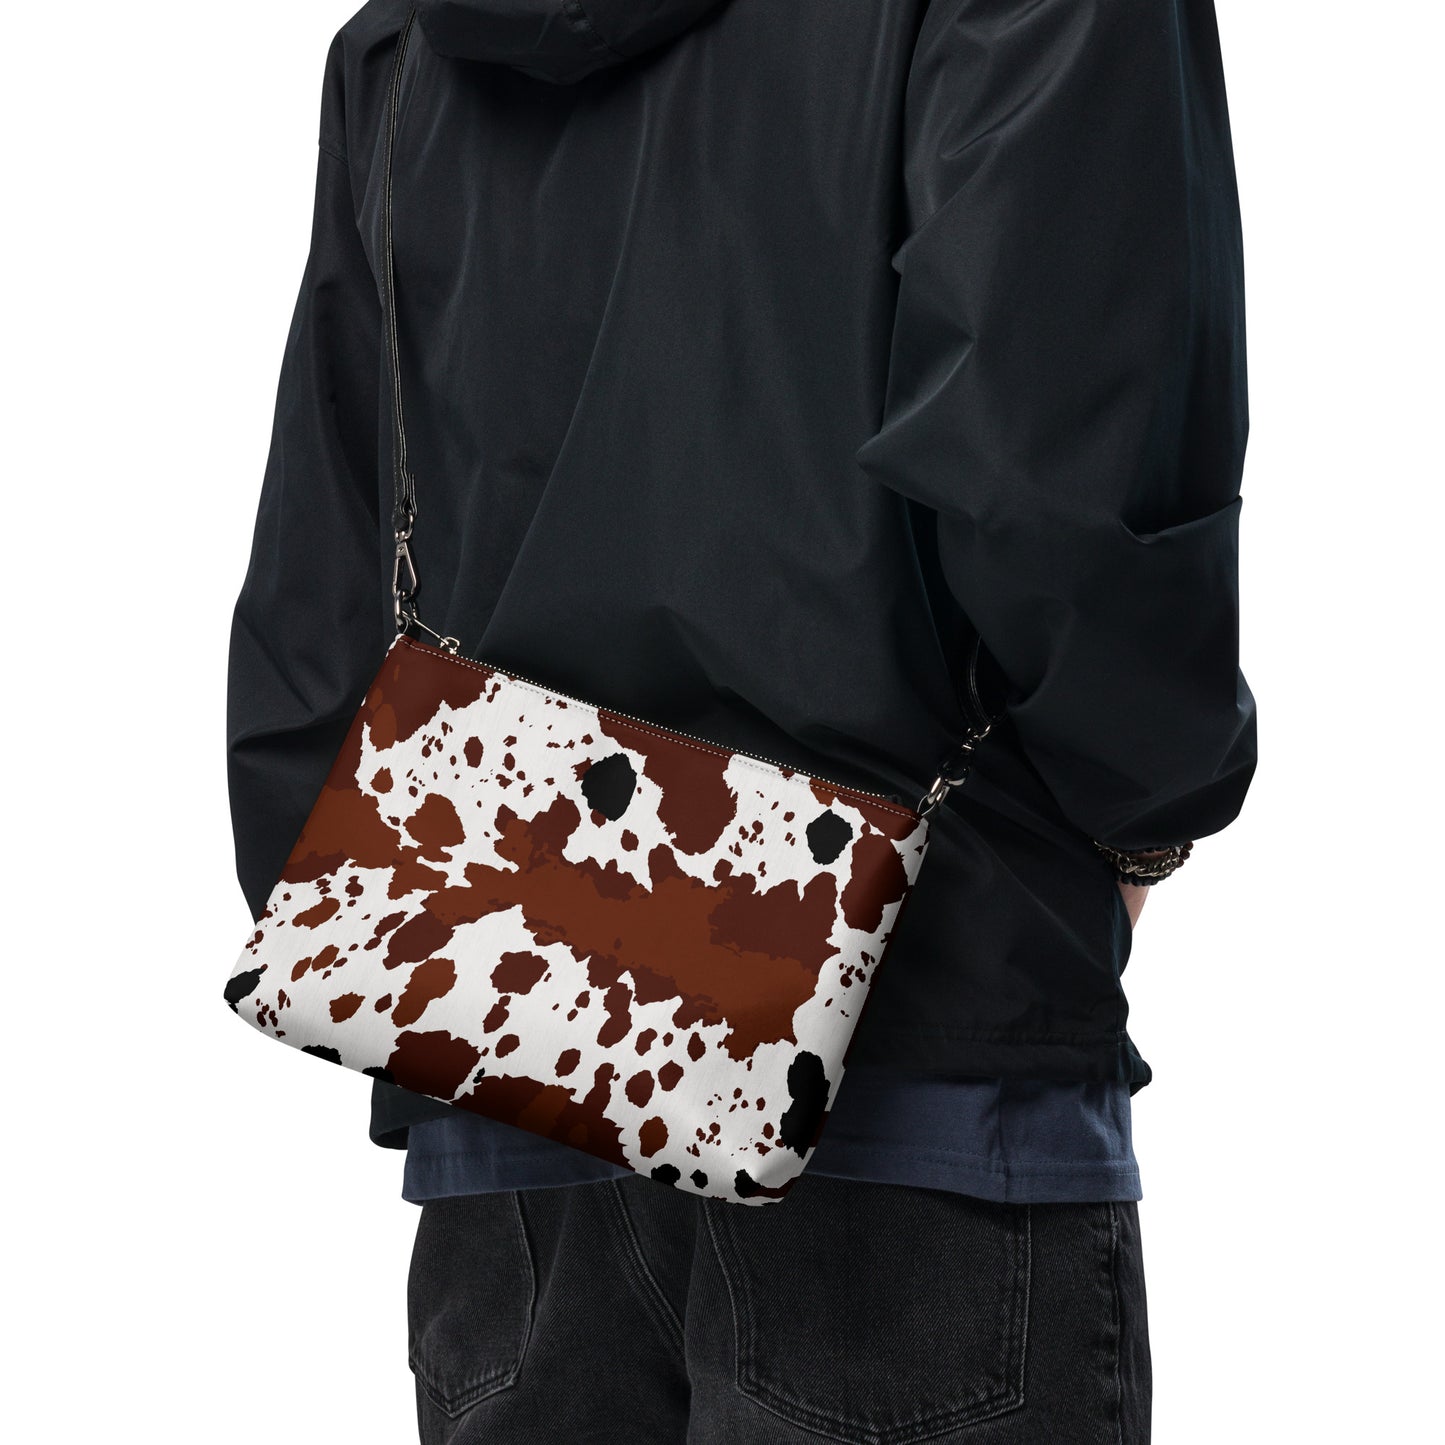 Faux Cowhide Crossbody bag with Adjustable Strap CedarHill Country Market